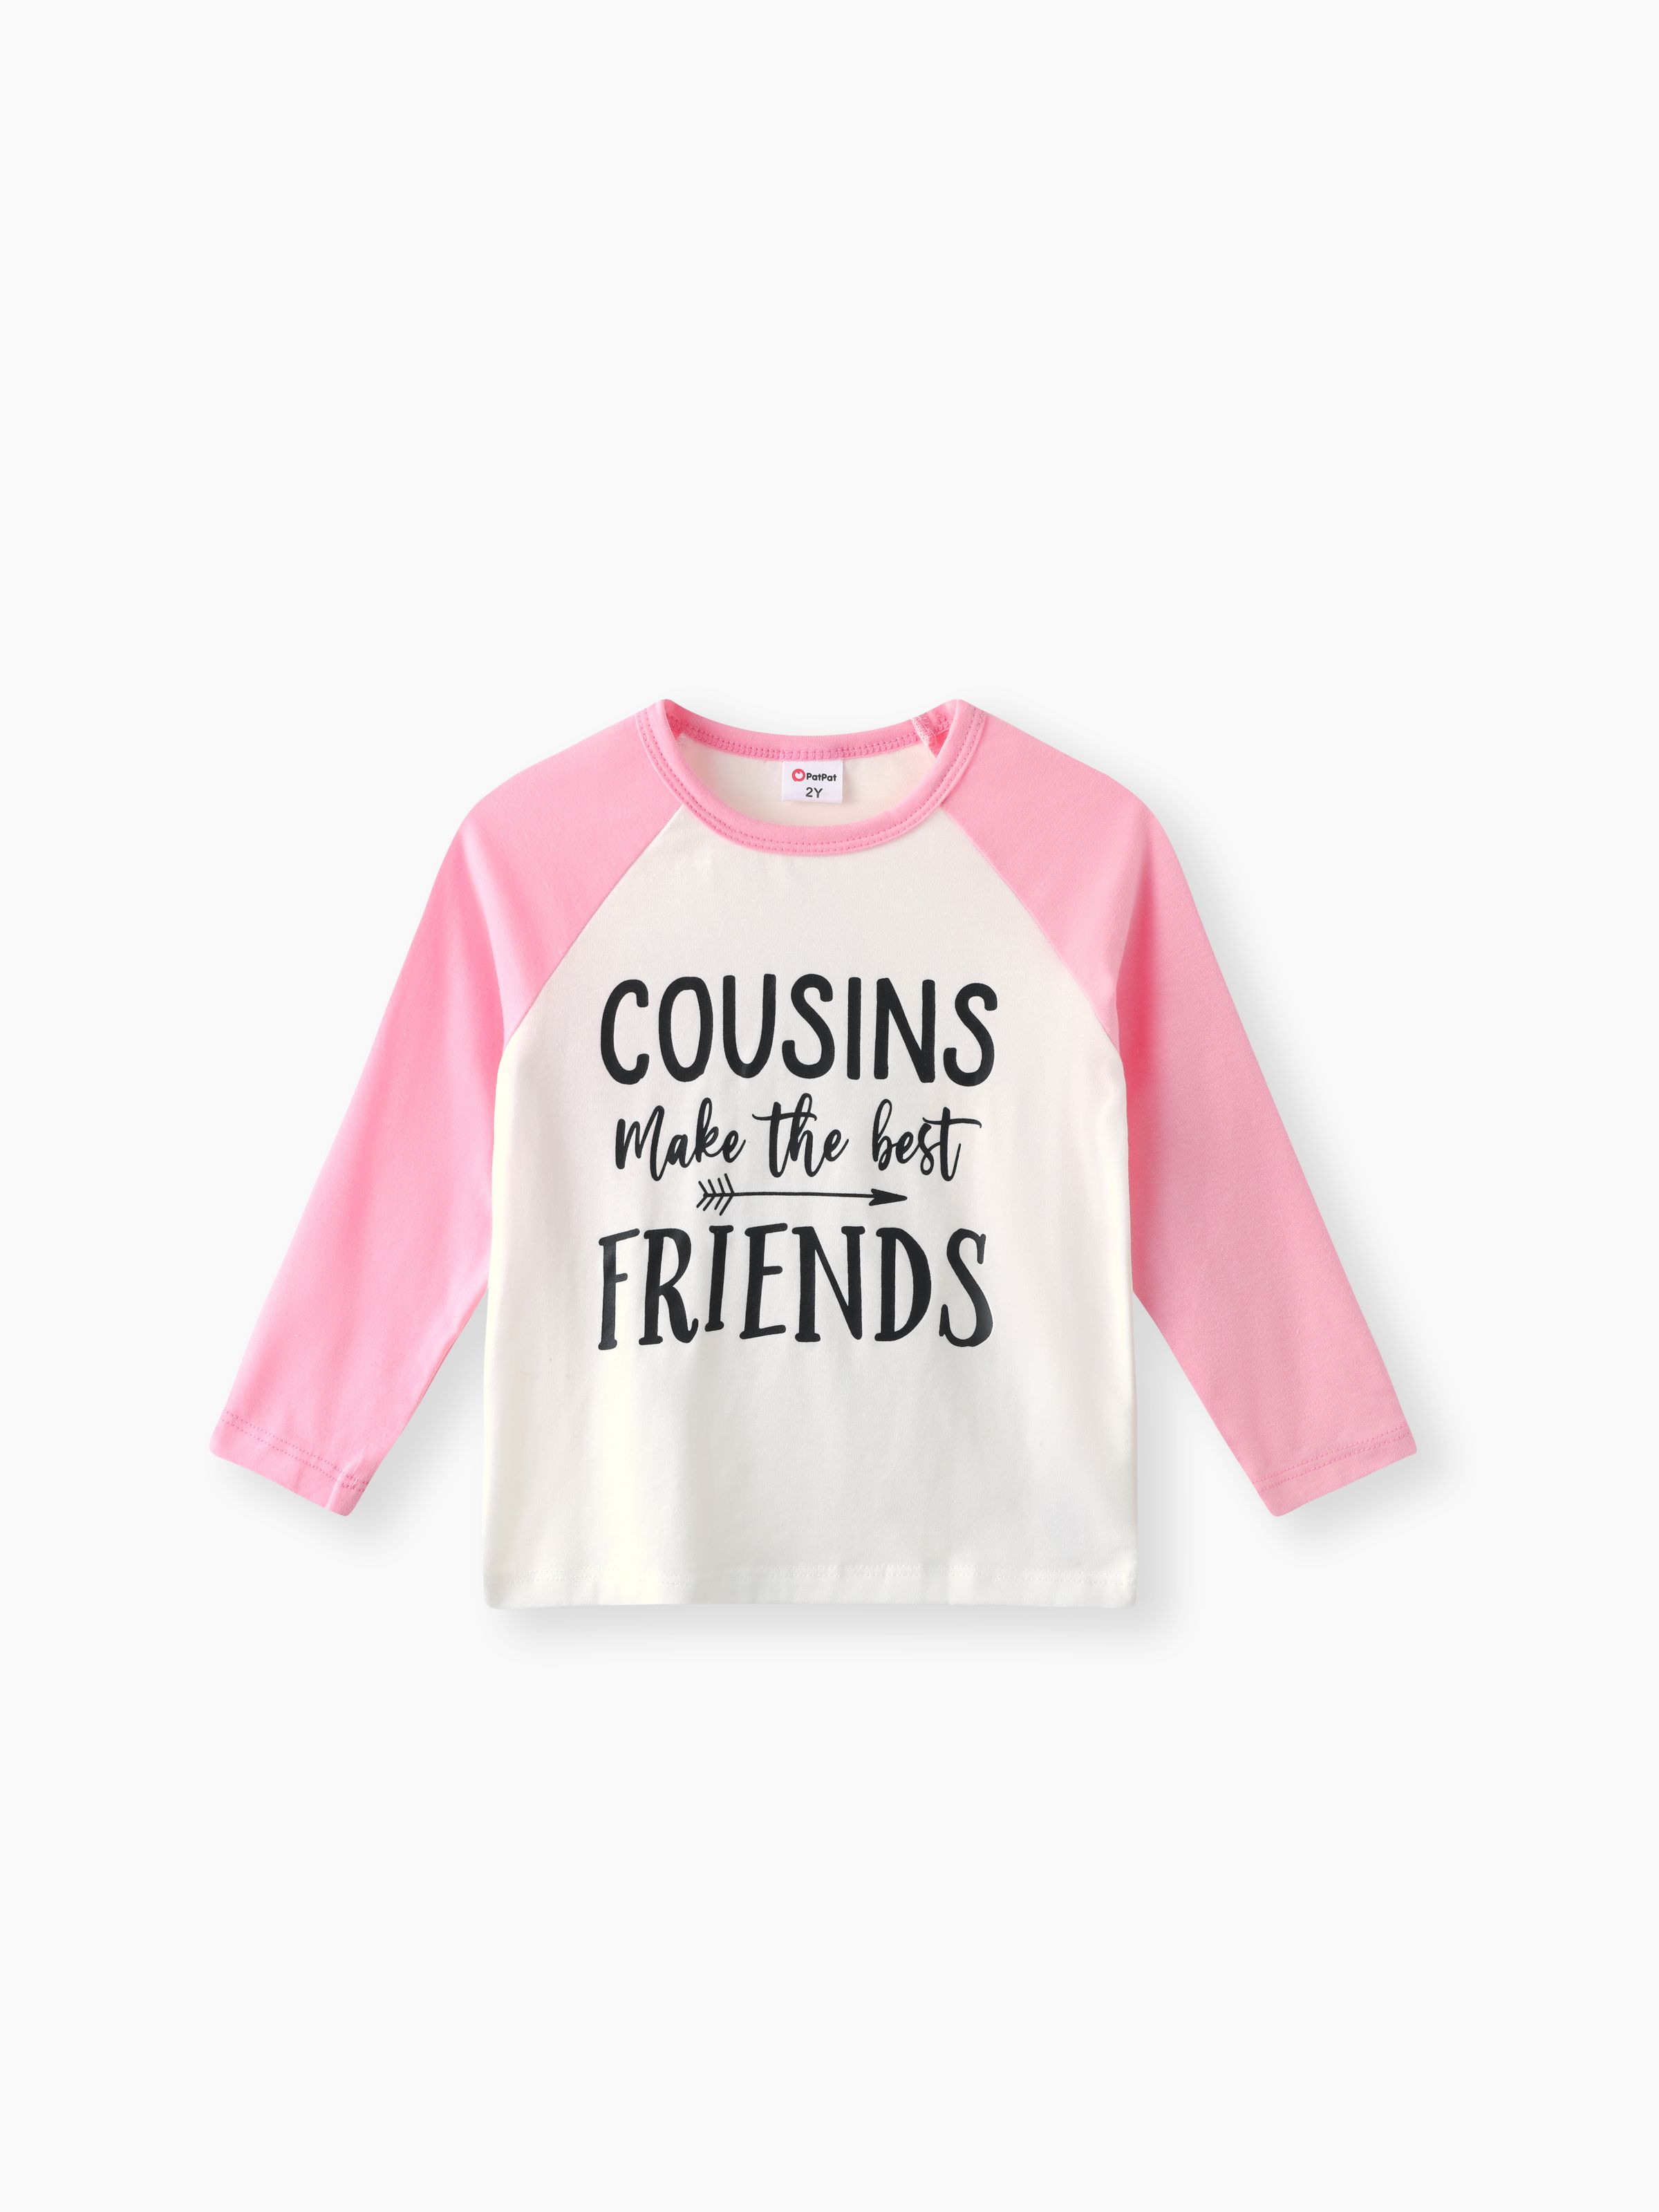 

Toddler Boy/Girl Letters Print Colorblock Long-sleeve Tee